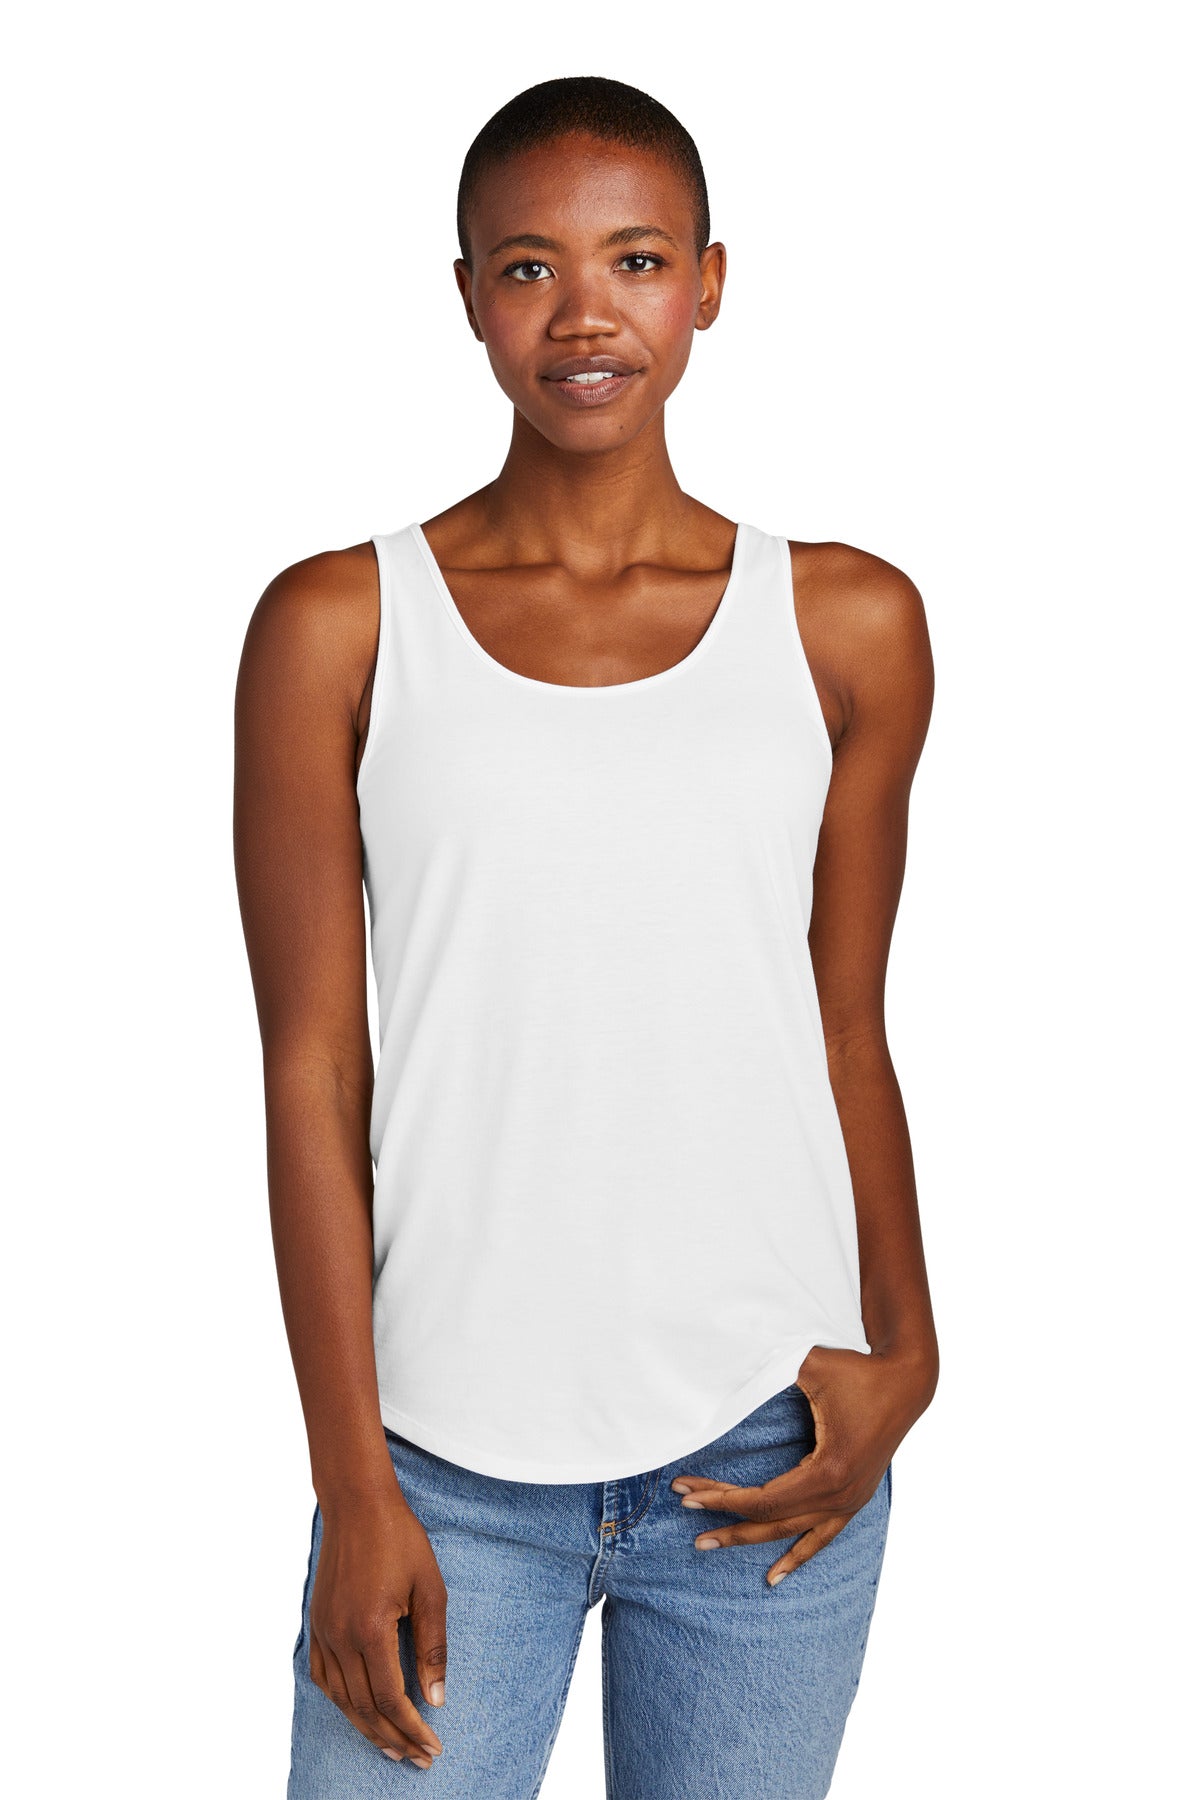 District® Women's Perfect Tri® Relaxed Tank DT151 - DFW Impression